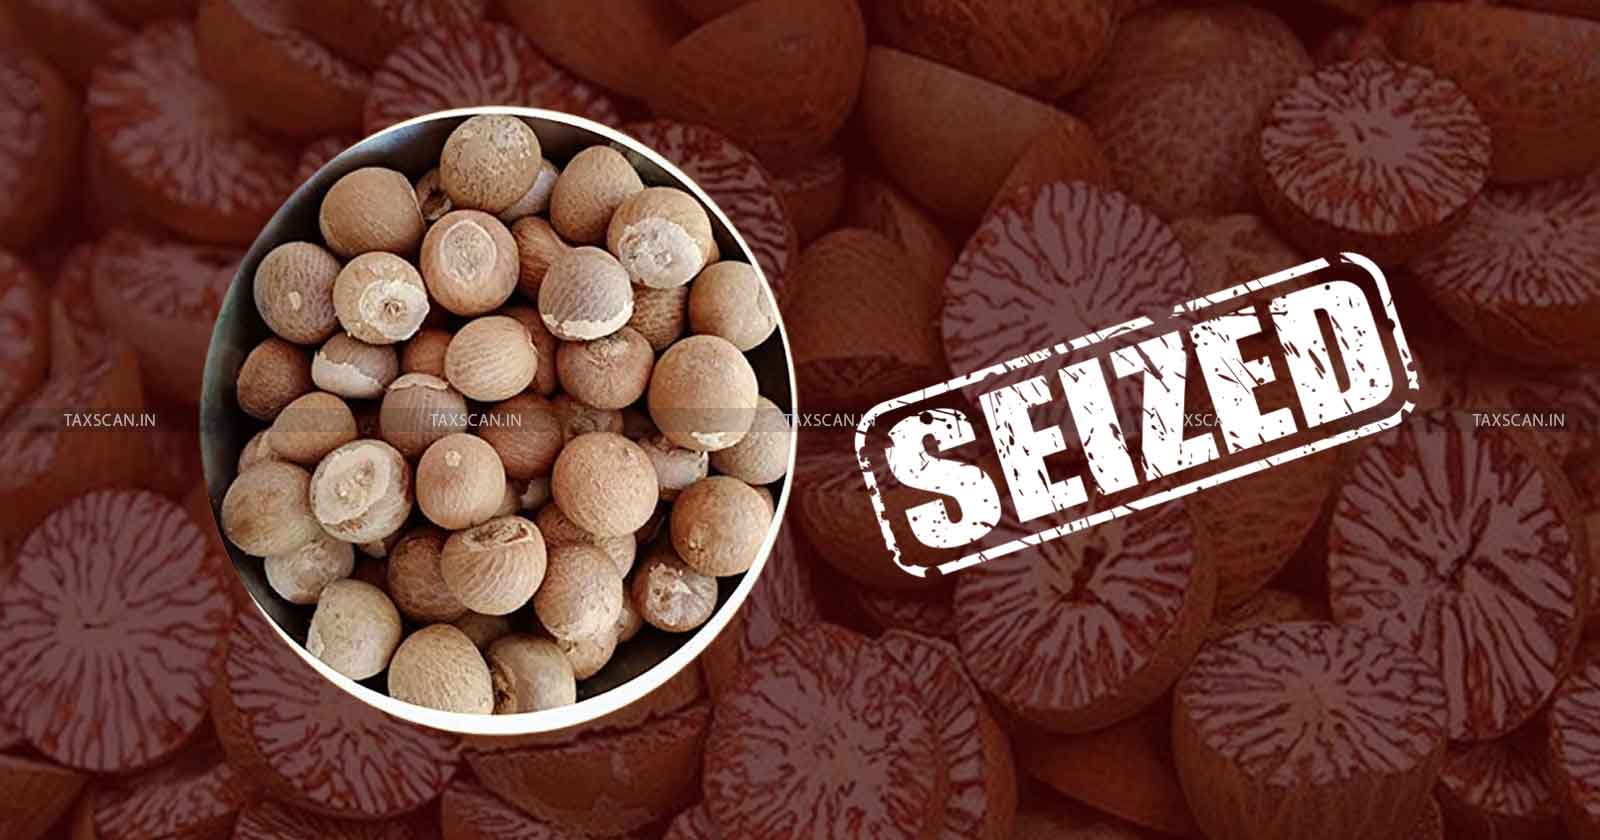 Seized Areca nuts - Seized - Areca nuts - Proof - Human Consumption - Gauhati High Court - Zimma petition - Petition - Taxscan